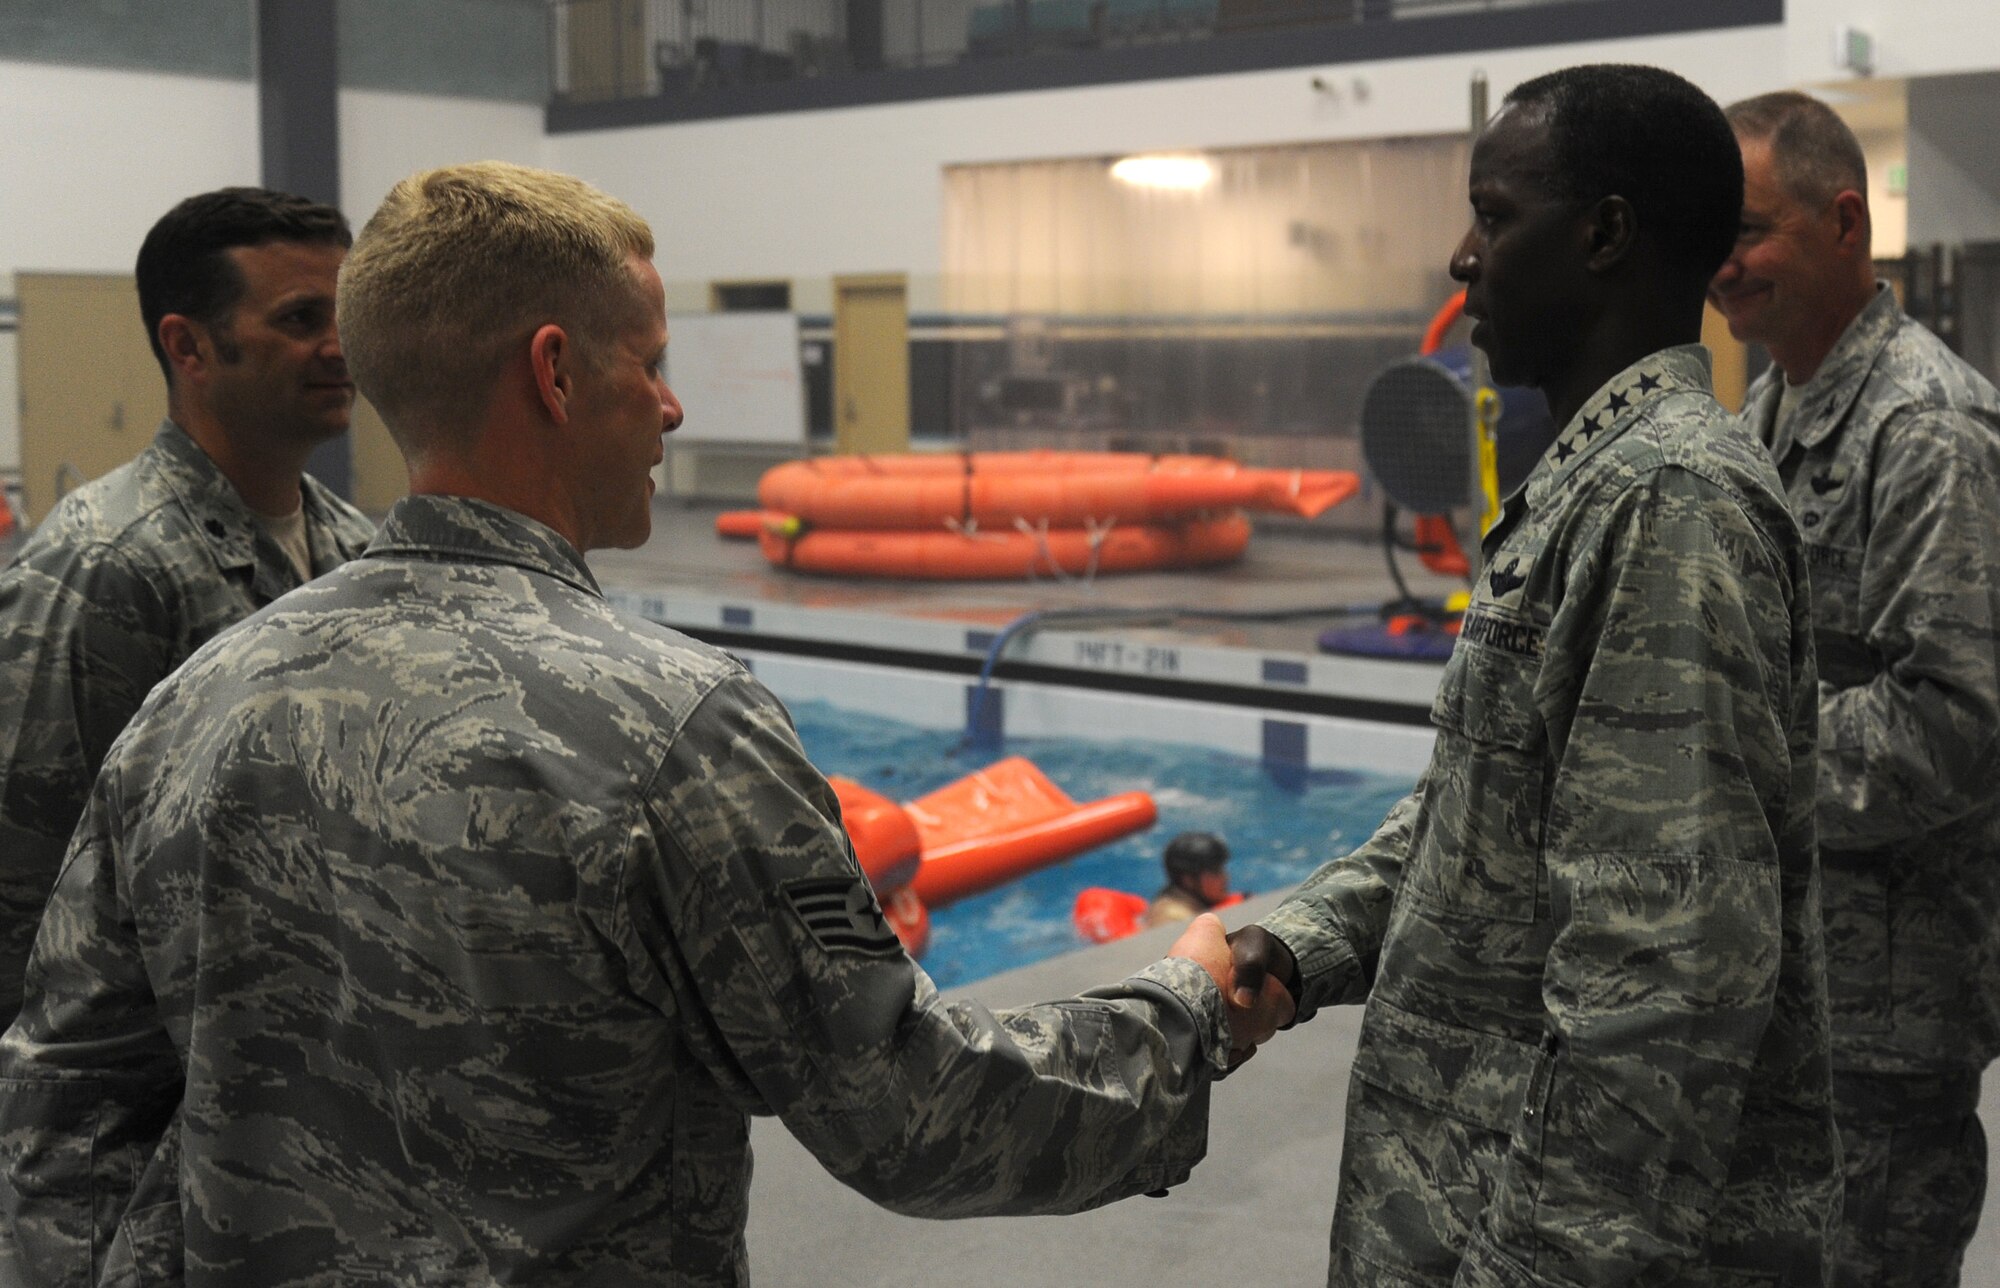 Gen. Edward Rice, commander of the Air Education and Training Command, exchanges thanks with Survival, Evasion, Resistance and Escape Airmen at the water training facility at Fairchild Monday, July 1, 2013.  While on base, the general was able to speak to Airmen about sequestration.  (U.S. Air Force photo by Airman 1st Class Sam Fogleman/Released)